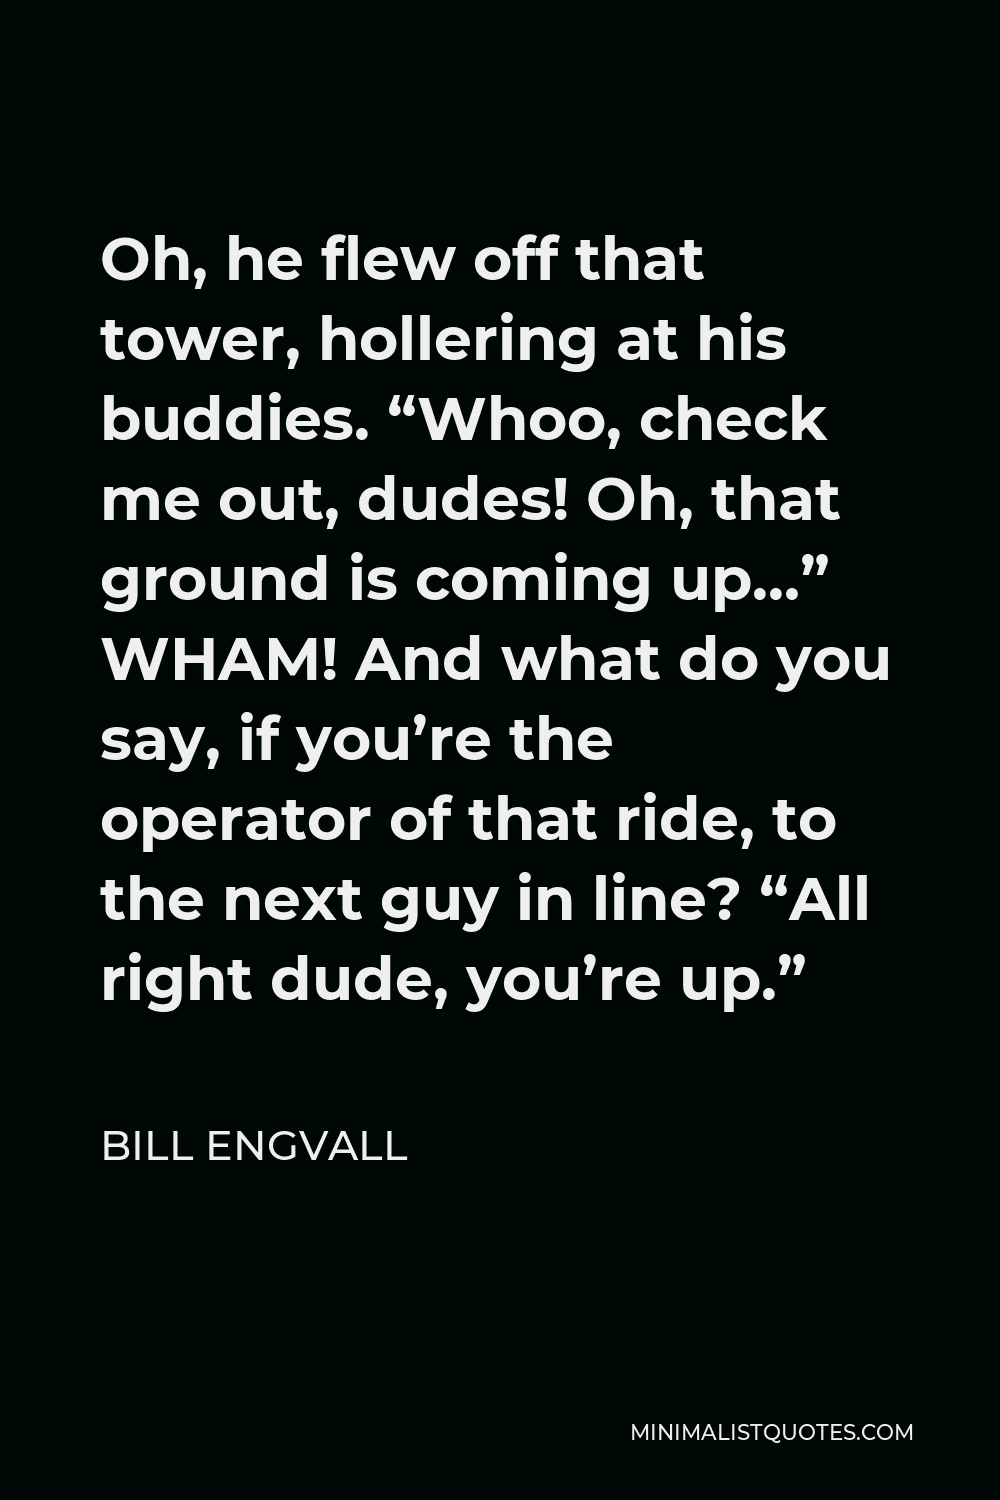 Bill Engvall Quote - Oh, he flew off that tower, hollering at his buddies. “Whoo, check me out, dudes! Oh, that ground is coming up…” WHAM! And what do you say, if you’re the operator of that ride, to the next guy in line? “All right dude, you’re up.”